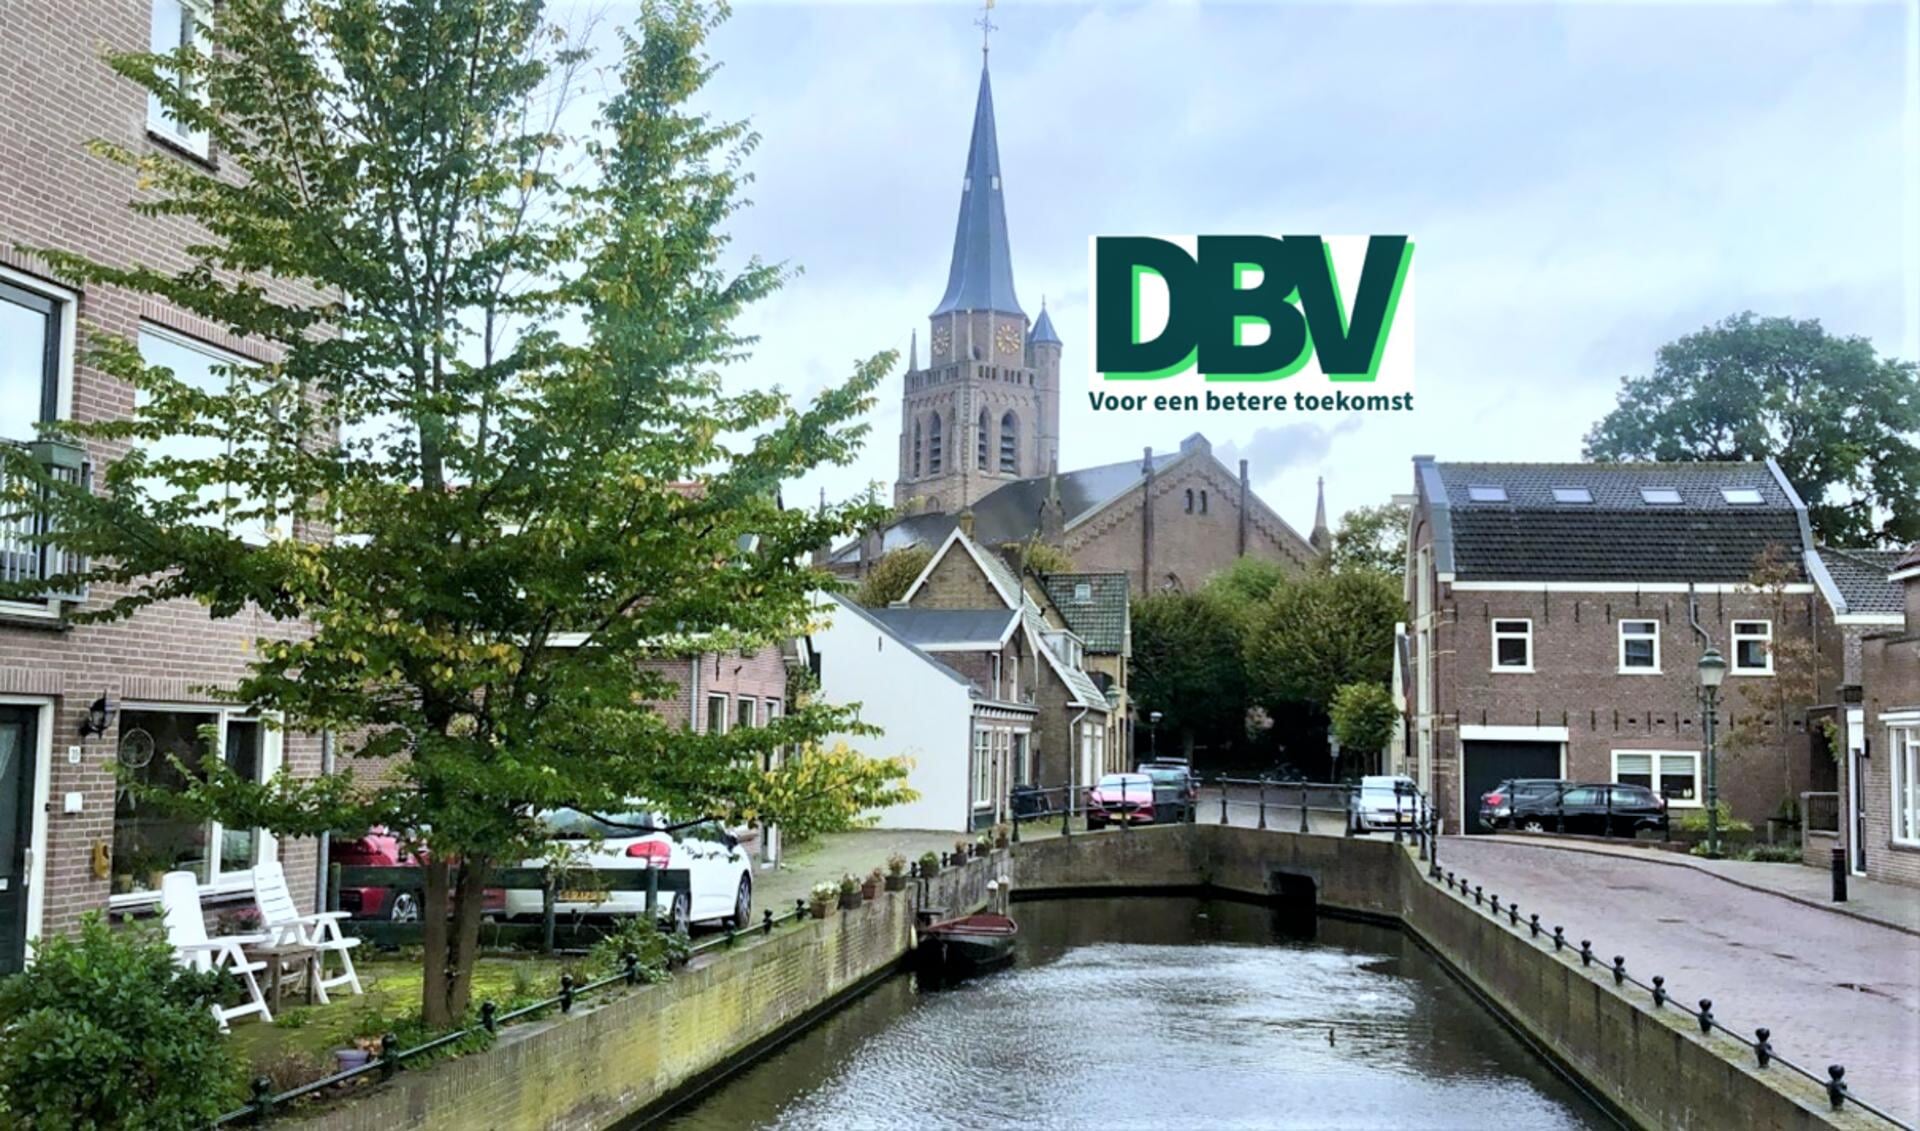 'Voorschoten Beloofd' is the BSN students' contribution to the community and the environment. The project aims to create an Almanac, widely available to all residents, for a sustainable future . Photo: BSN